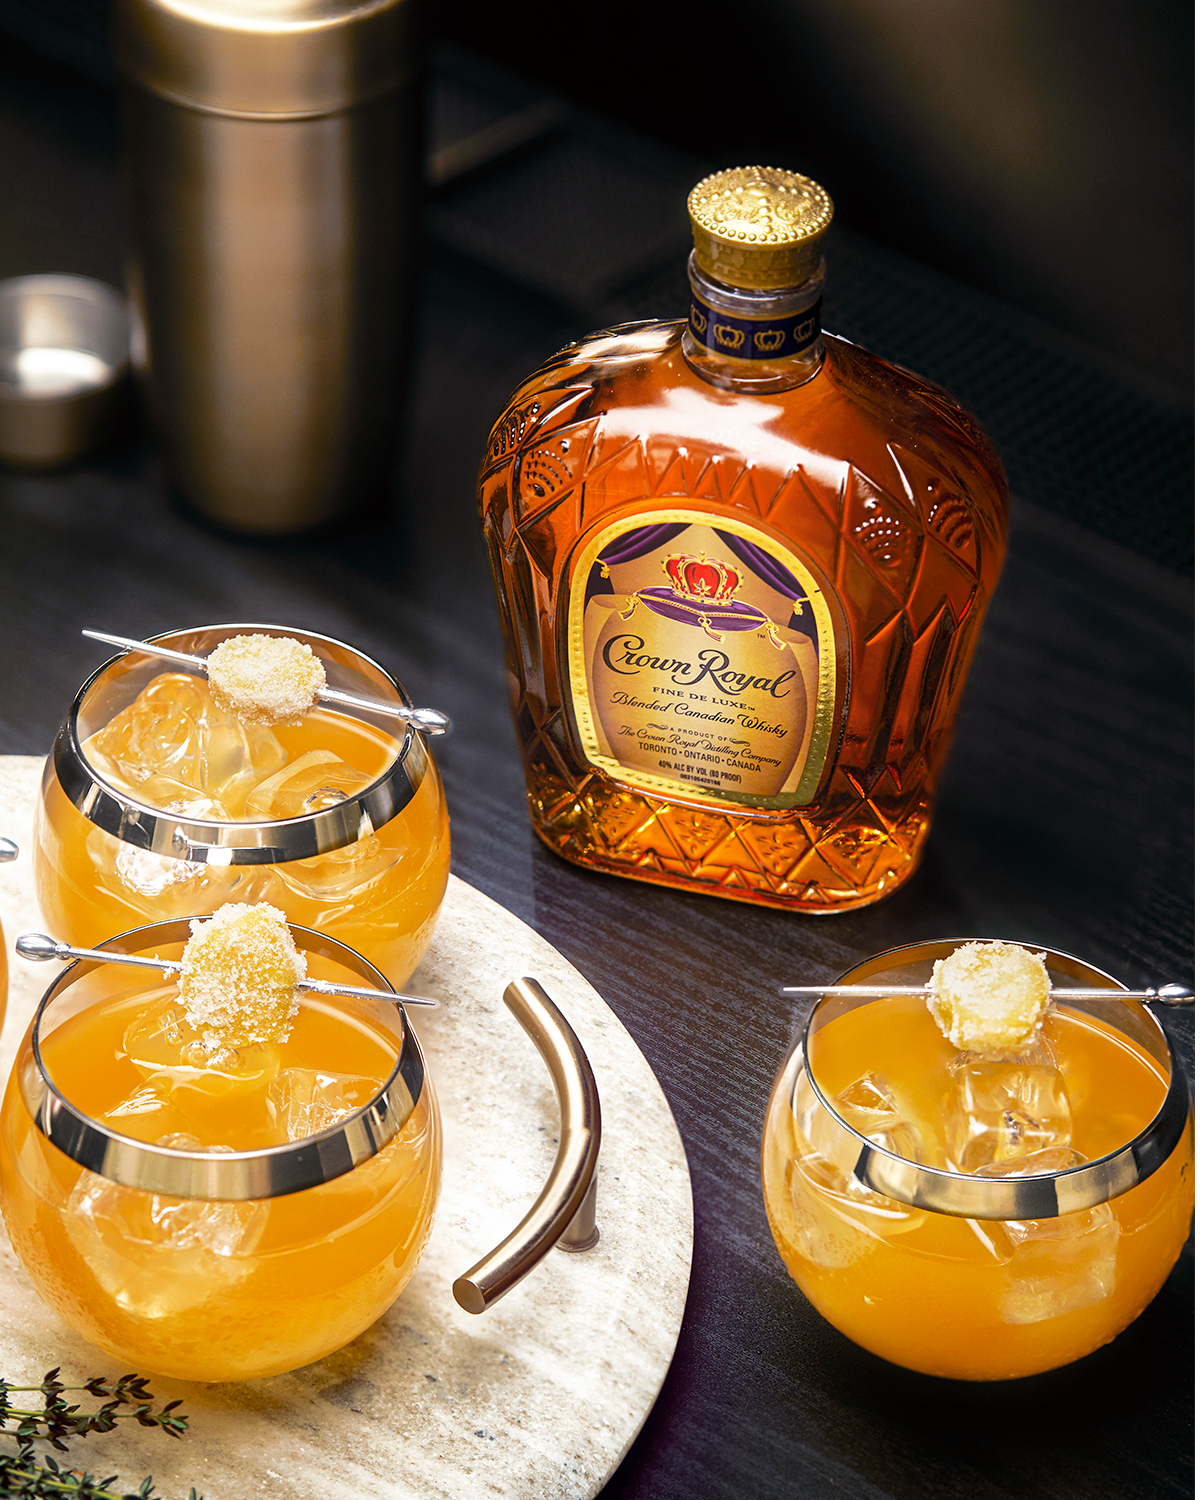 Crown Royal Clementine & Ginger Old Fashioned Whisky Cocktail